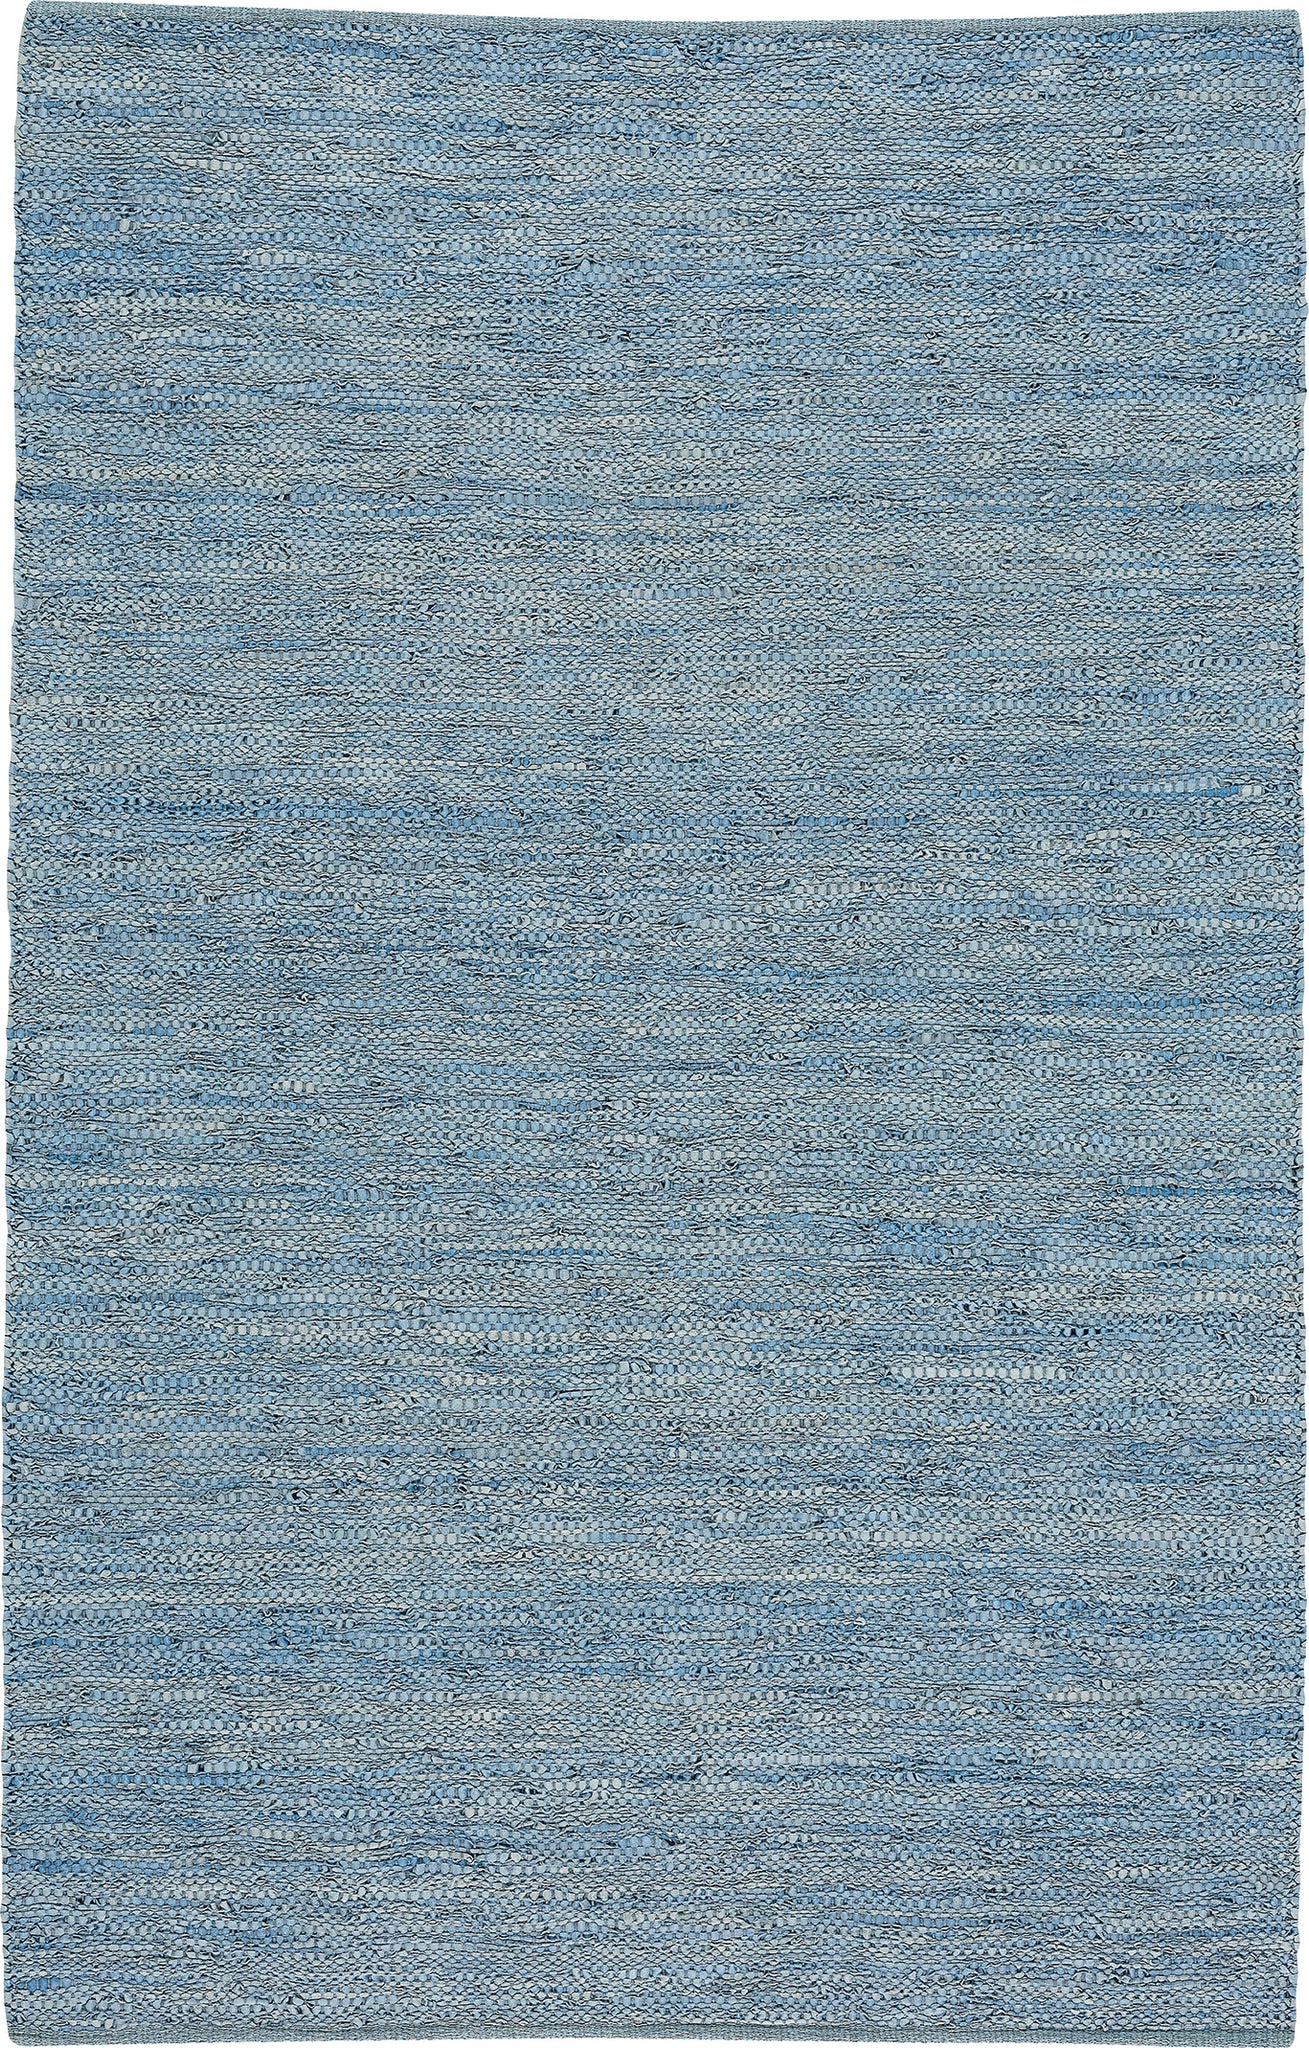 Capel Zions View 3229 Blue Area Rug main image